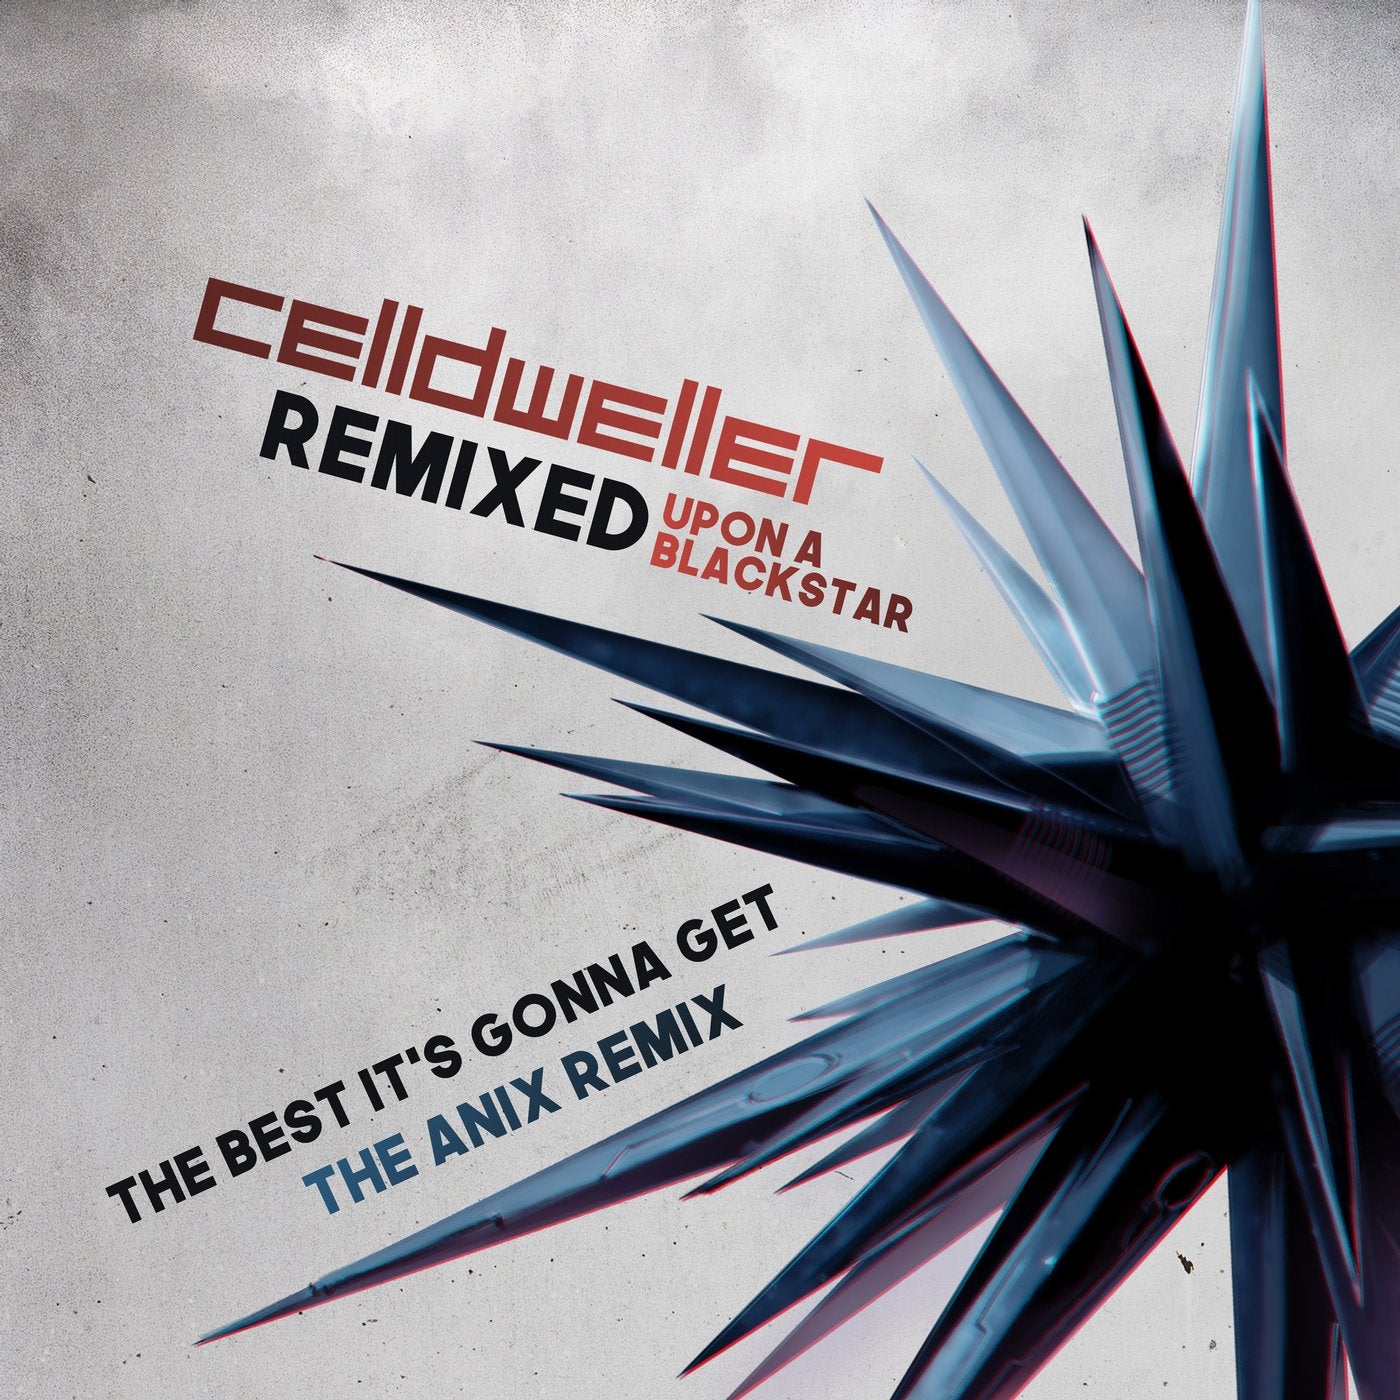 The Best It's Gonna Get - The Anix Remix